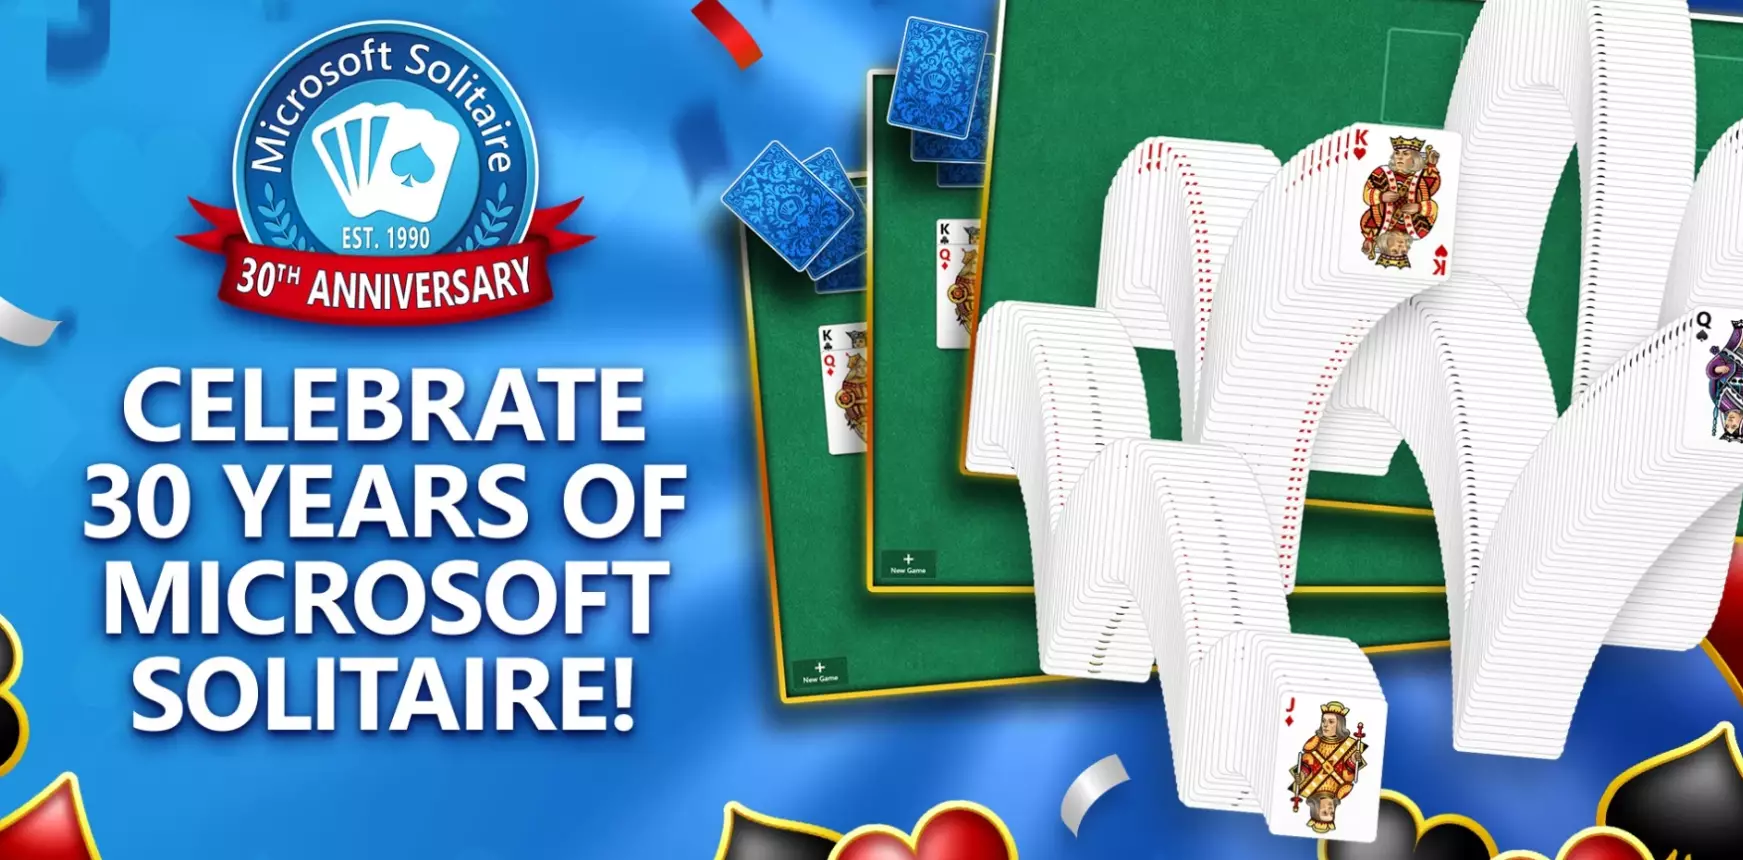 Microsoft's classic computer game Solitaire is 30 years old today.